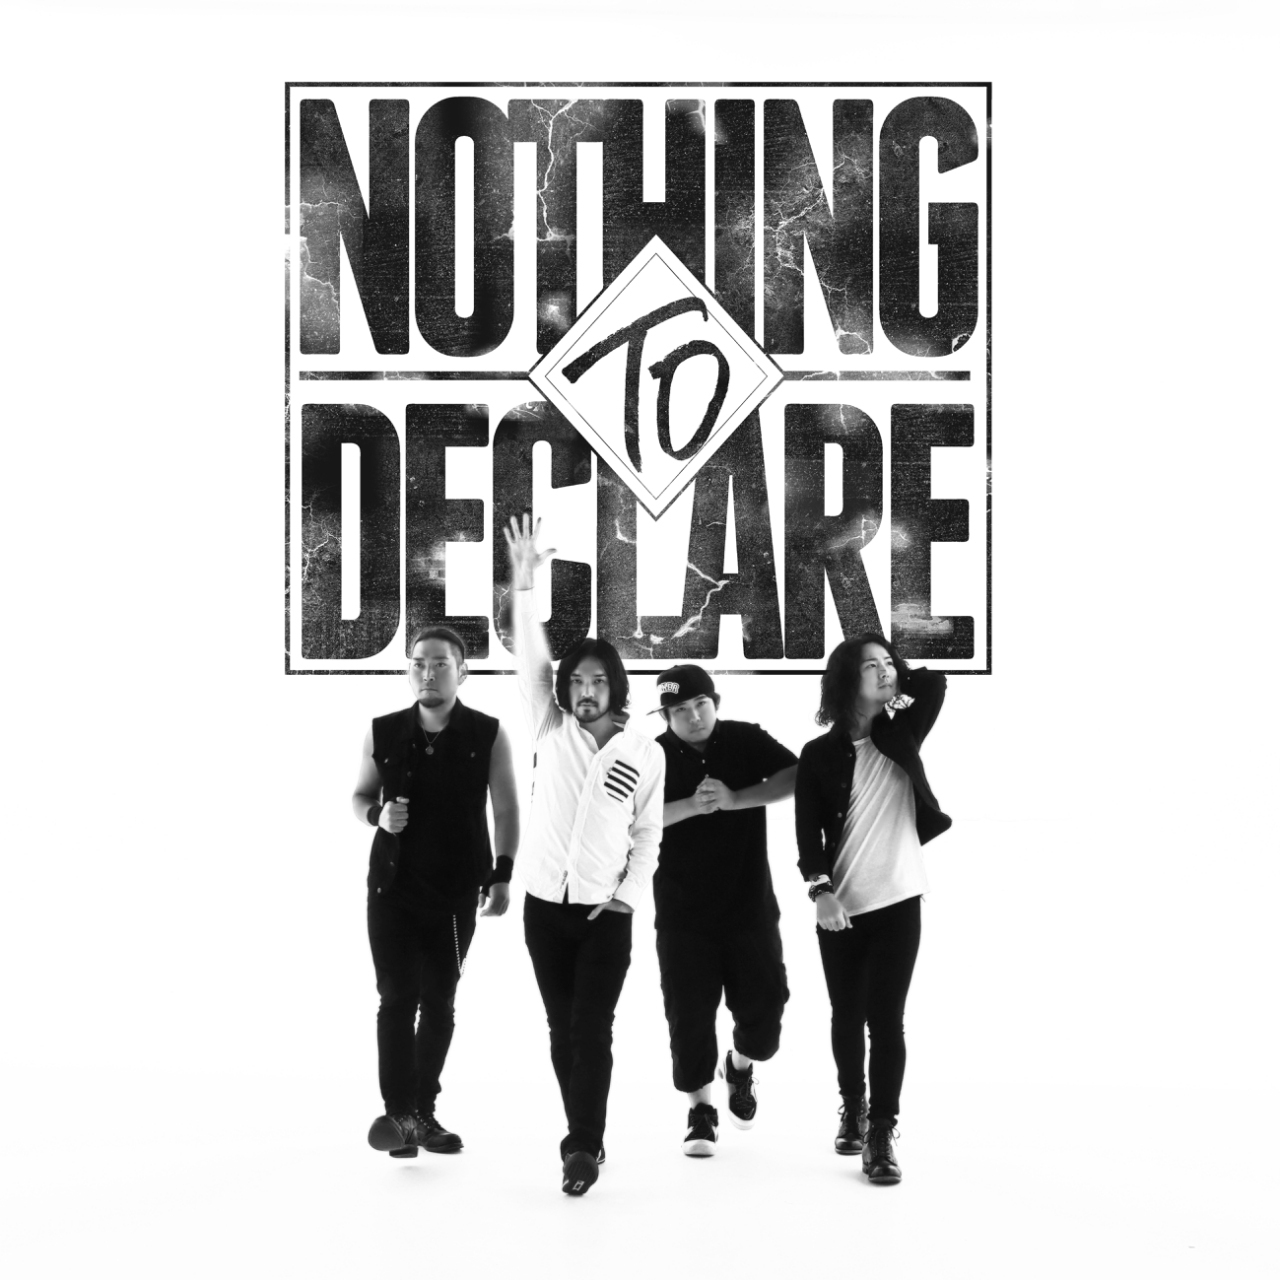 NOTHING TO DECLARE